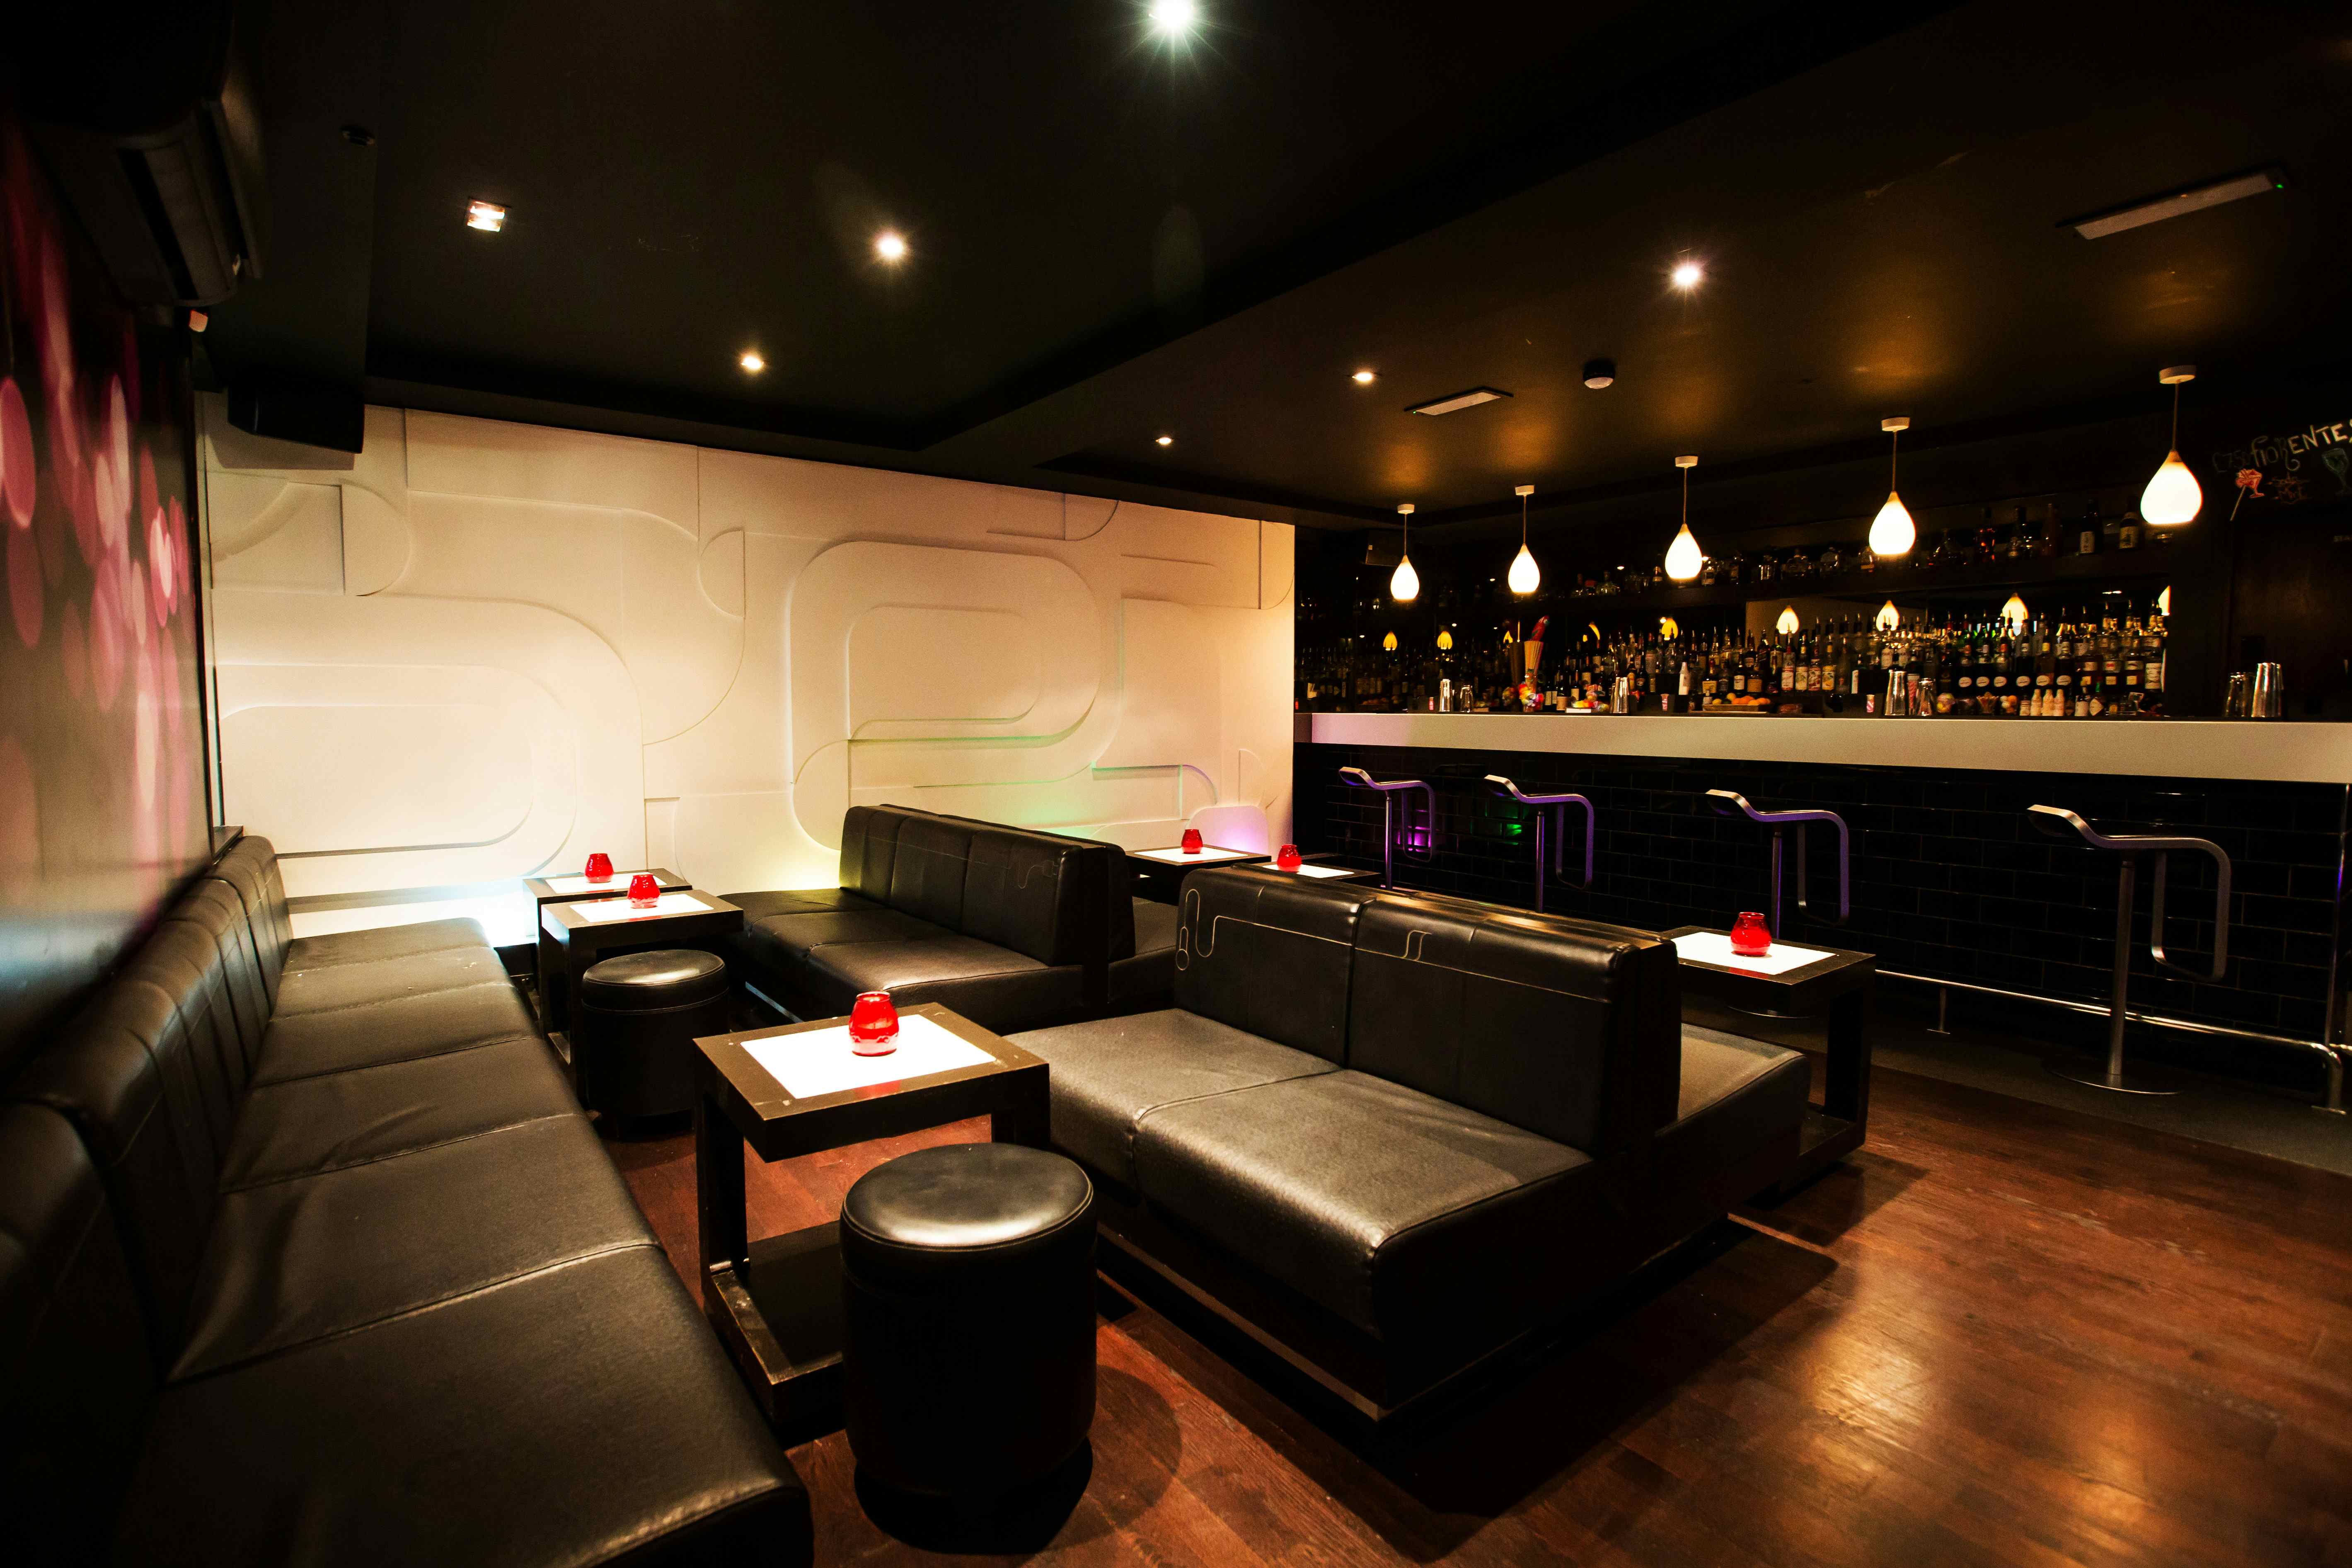 Exclusive Venue Hire - Private Karaoke Rooms and Bar, Lucky Voice Brighton